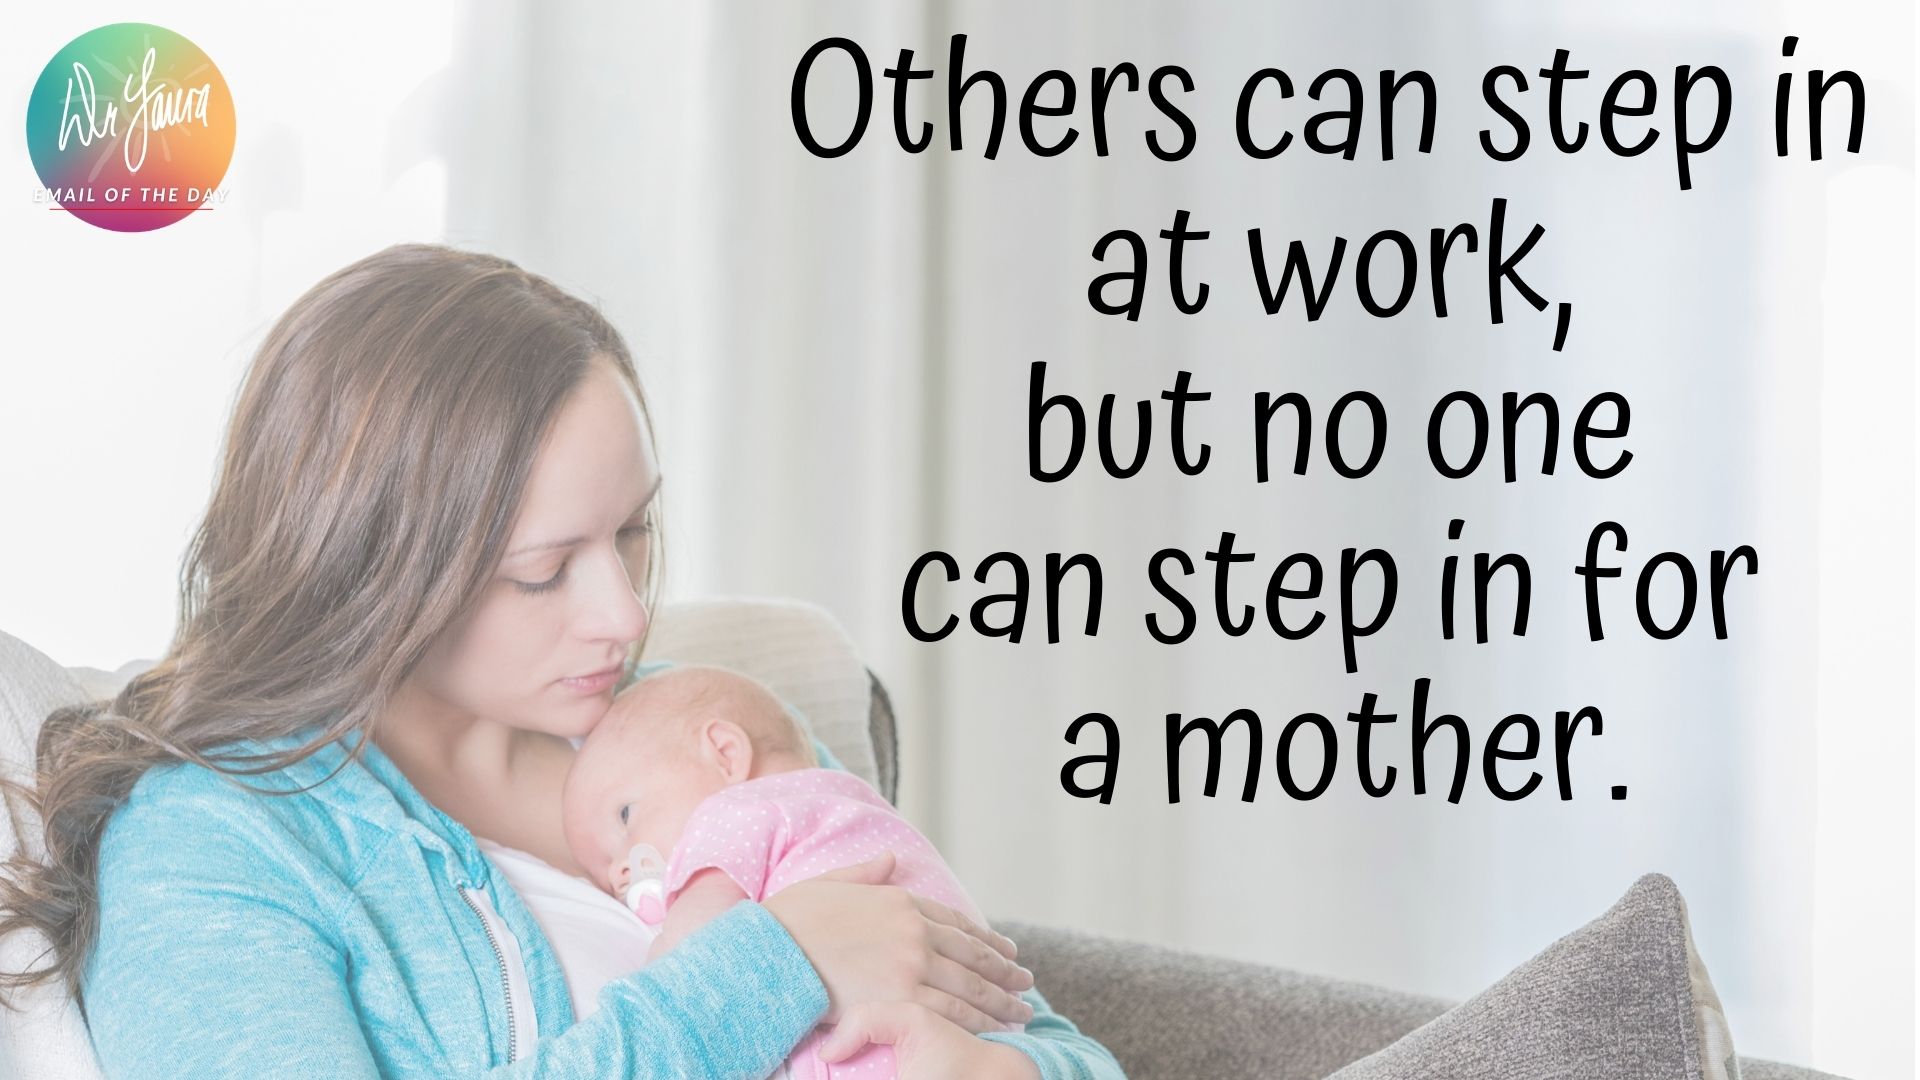 Email of the Day: No One Can Step in For a Mother